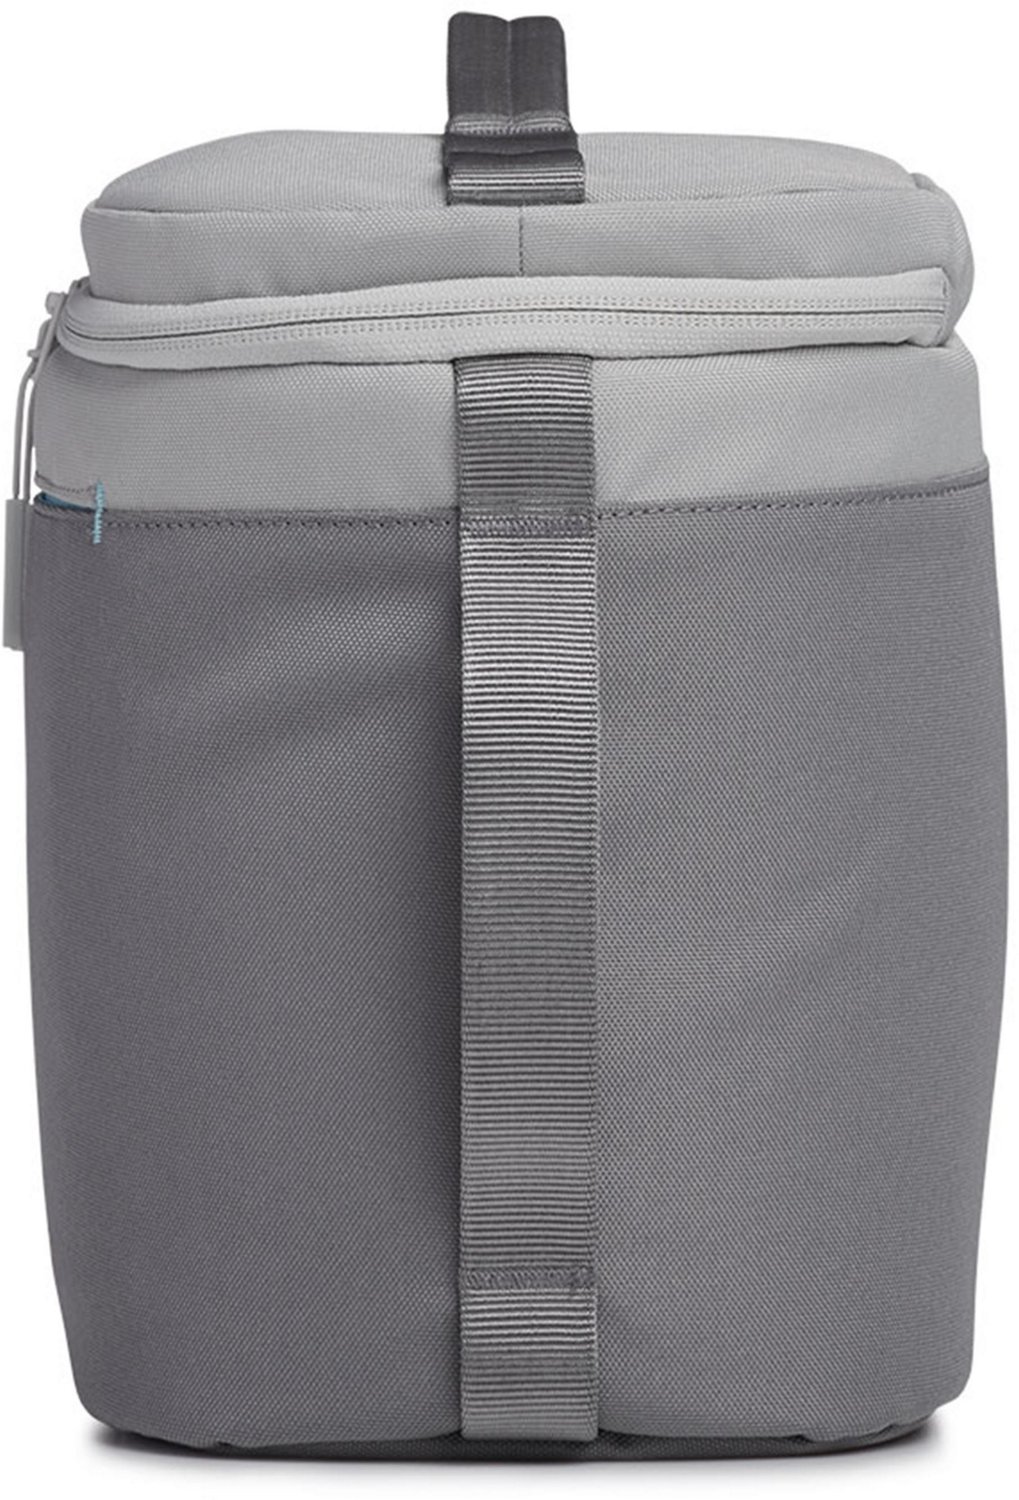 Hydro Flask 8 L Lunch Tote Review: Insulated Lunch Bag to Keep Food Cold